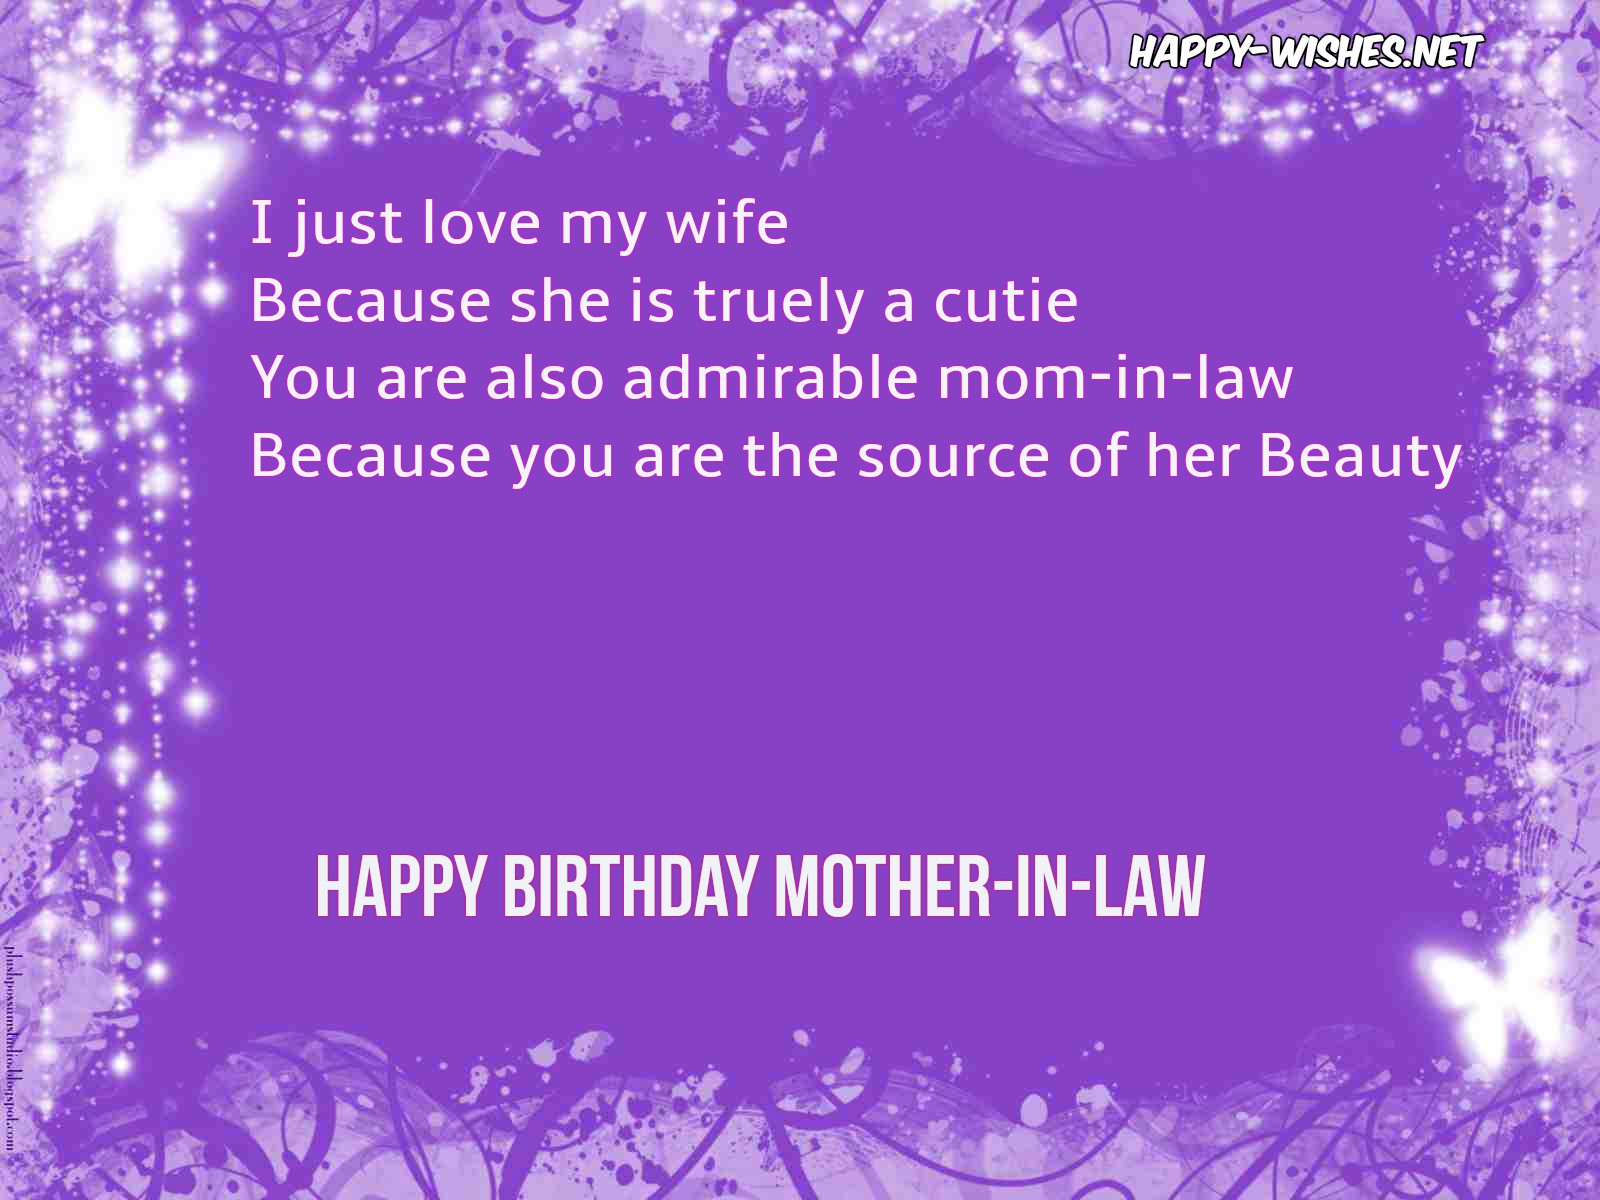 Happy birthday wishes for Mother-in-law